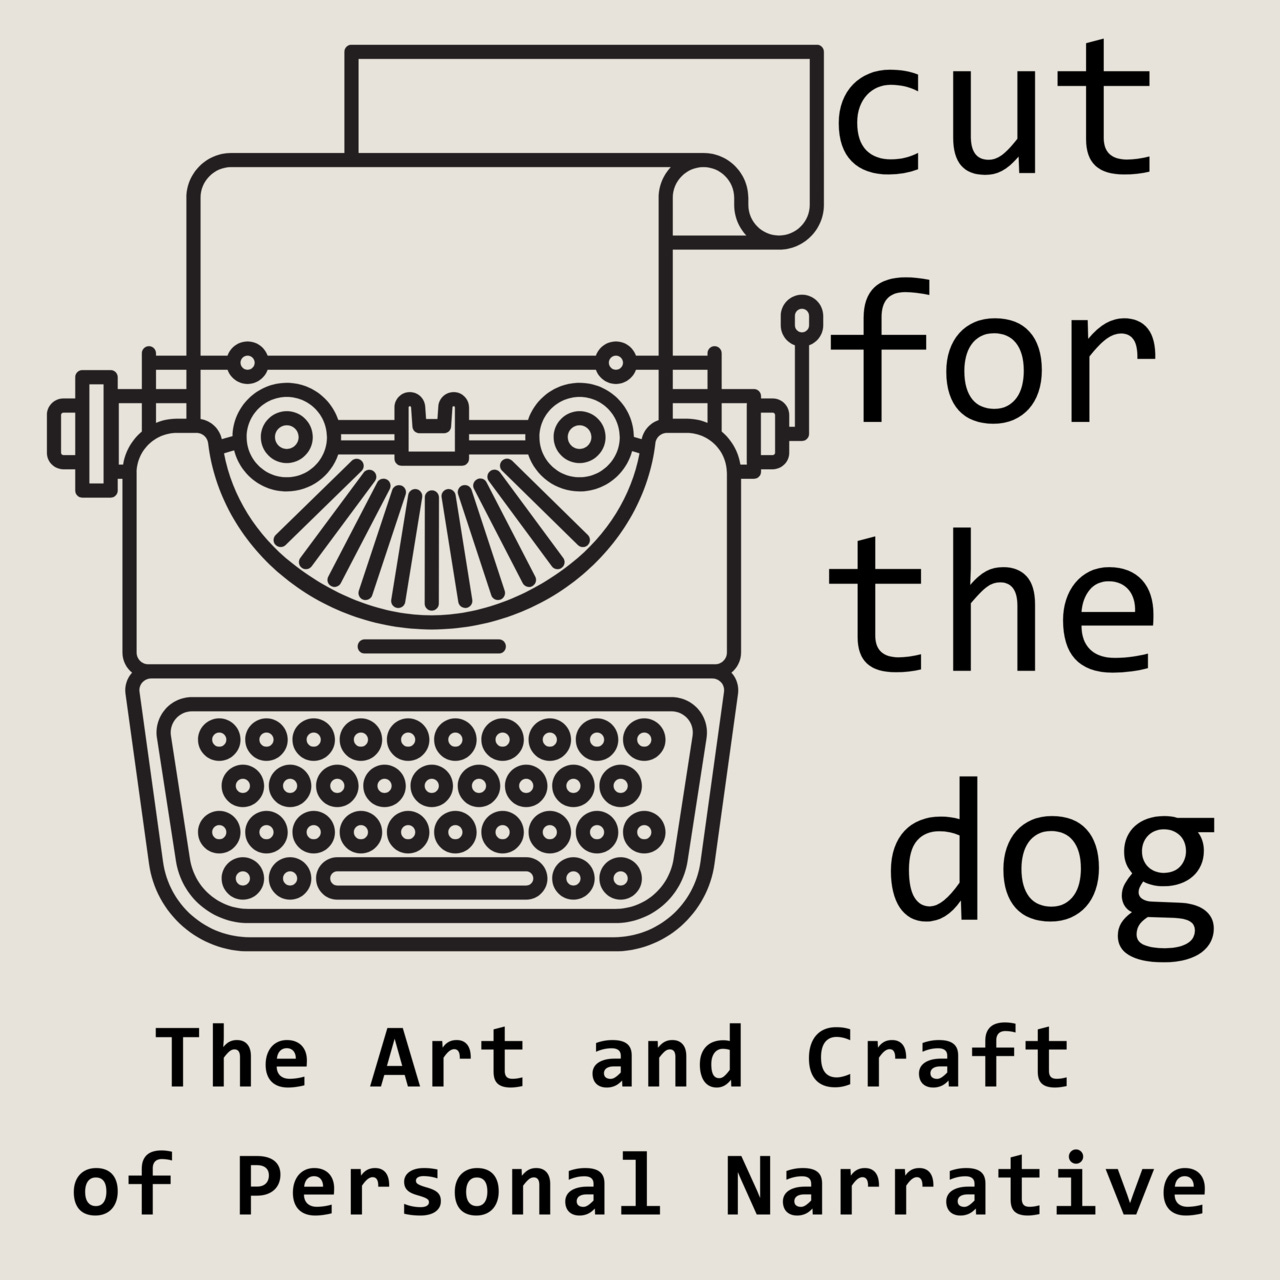 Artwork for Cut for the Dog: The Art and Craft of Personal Narrative